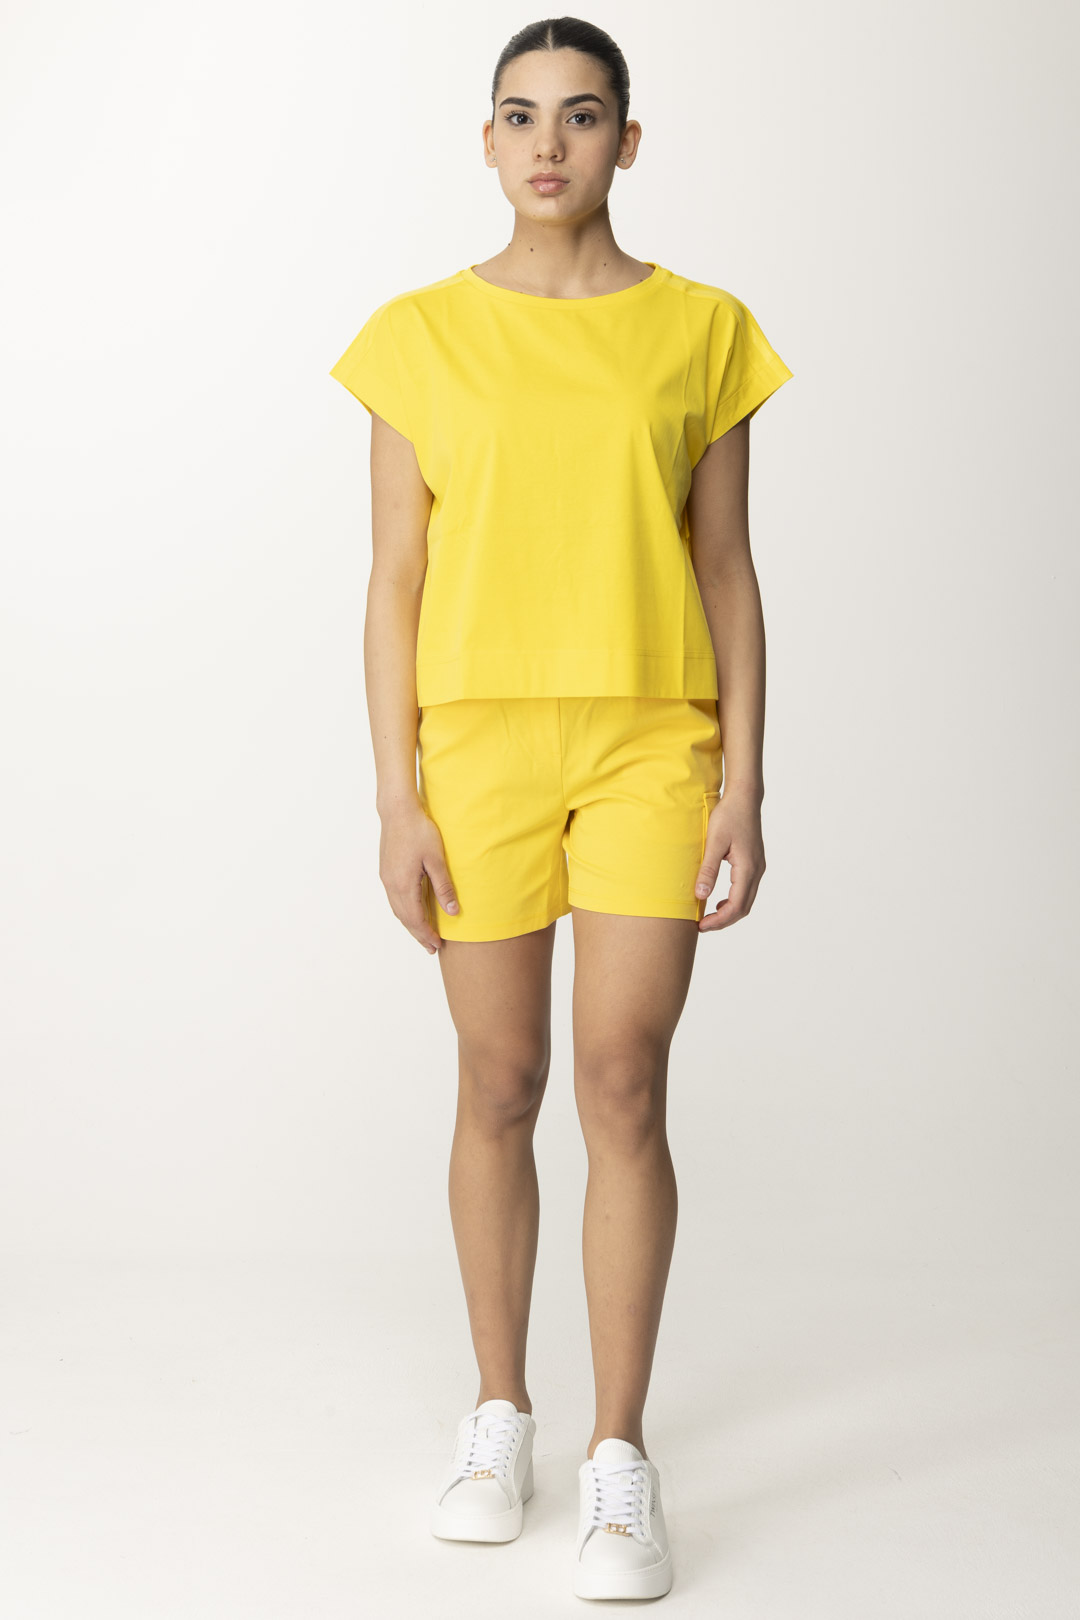 Preview: People Of Shibuya Boat Neck Oversized T-Shirt Giallo